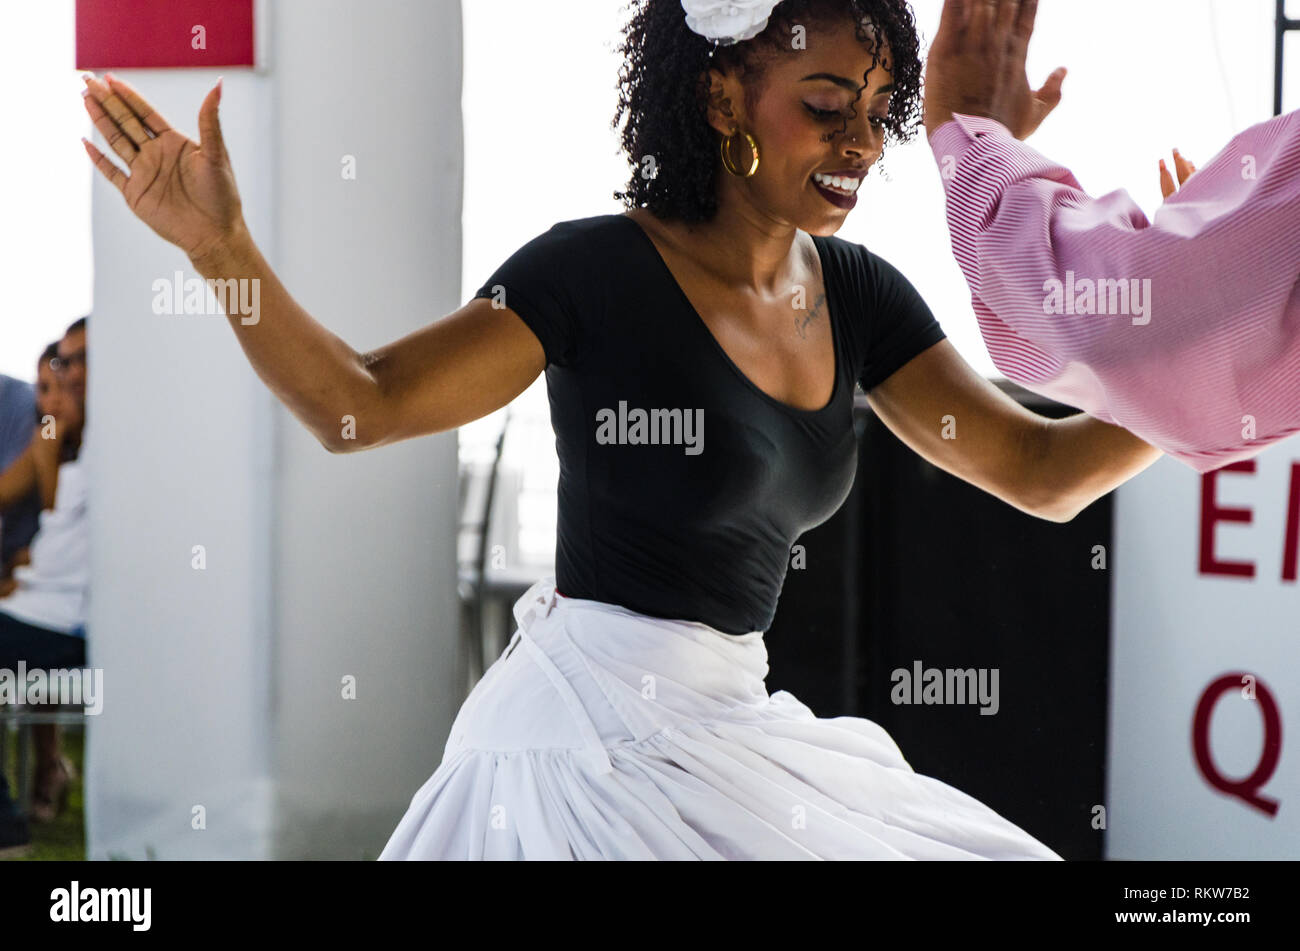 Lima, Peru January 25, 2019 : Afro-Peruvian Creole music dancer, dancing in an event of a company, mixes of African and Peruvian culture. Stock Photo